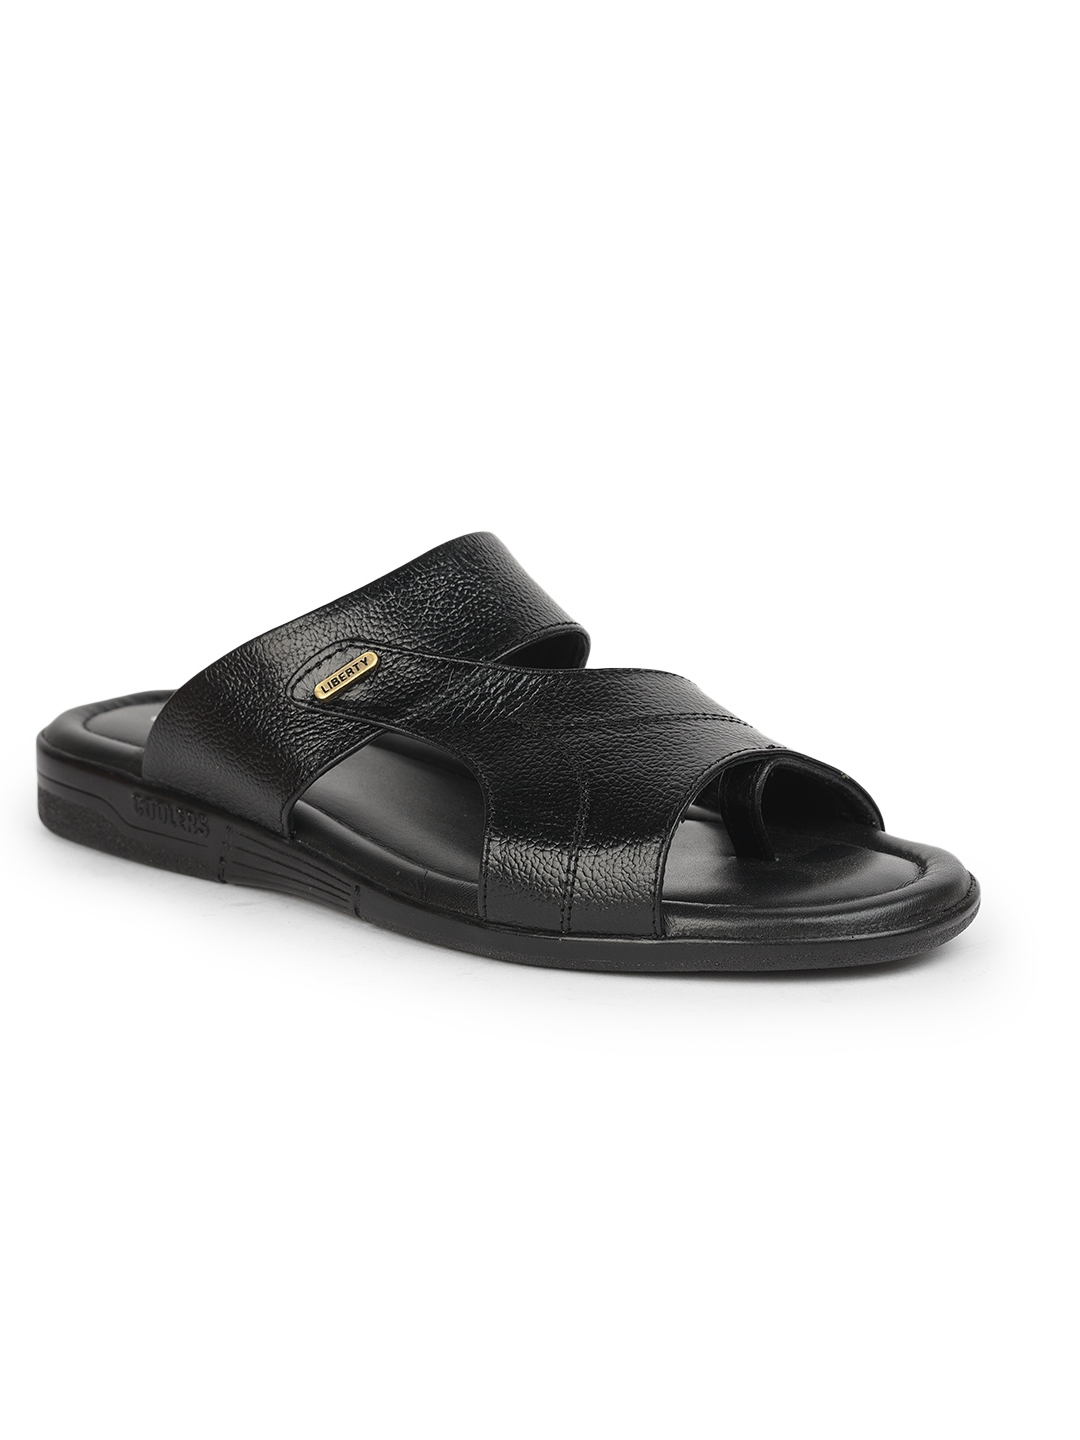 Liberty | Coolers by Liberty Black Slippers 7194-102 For :- Men